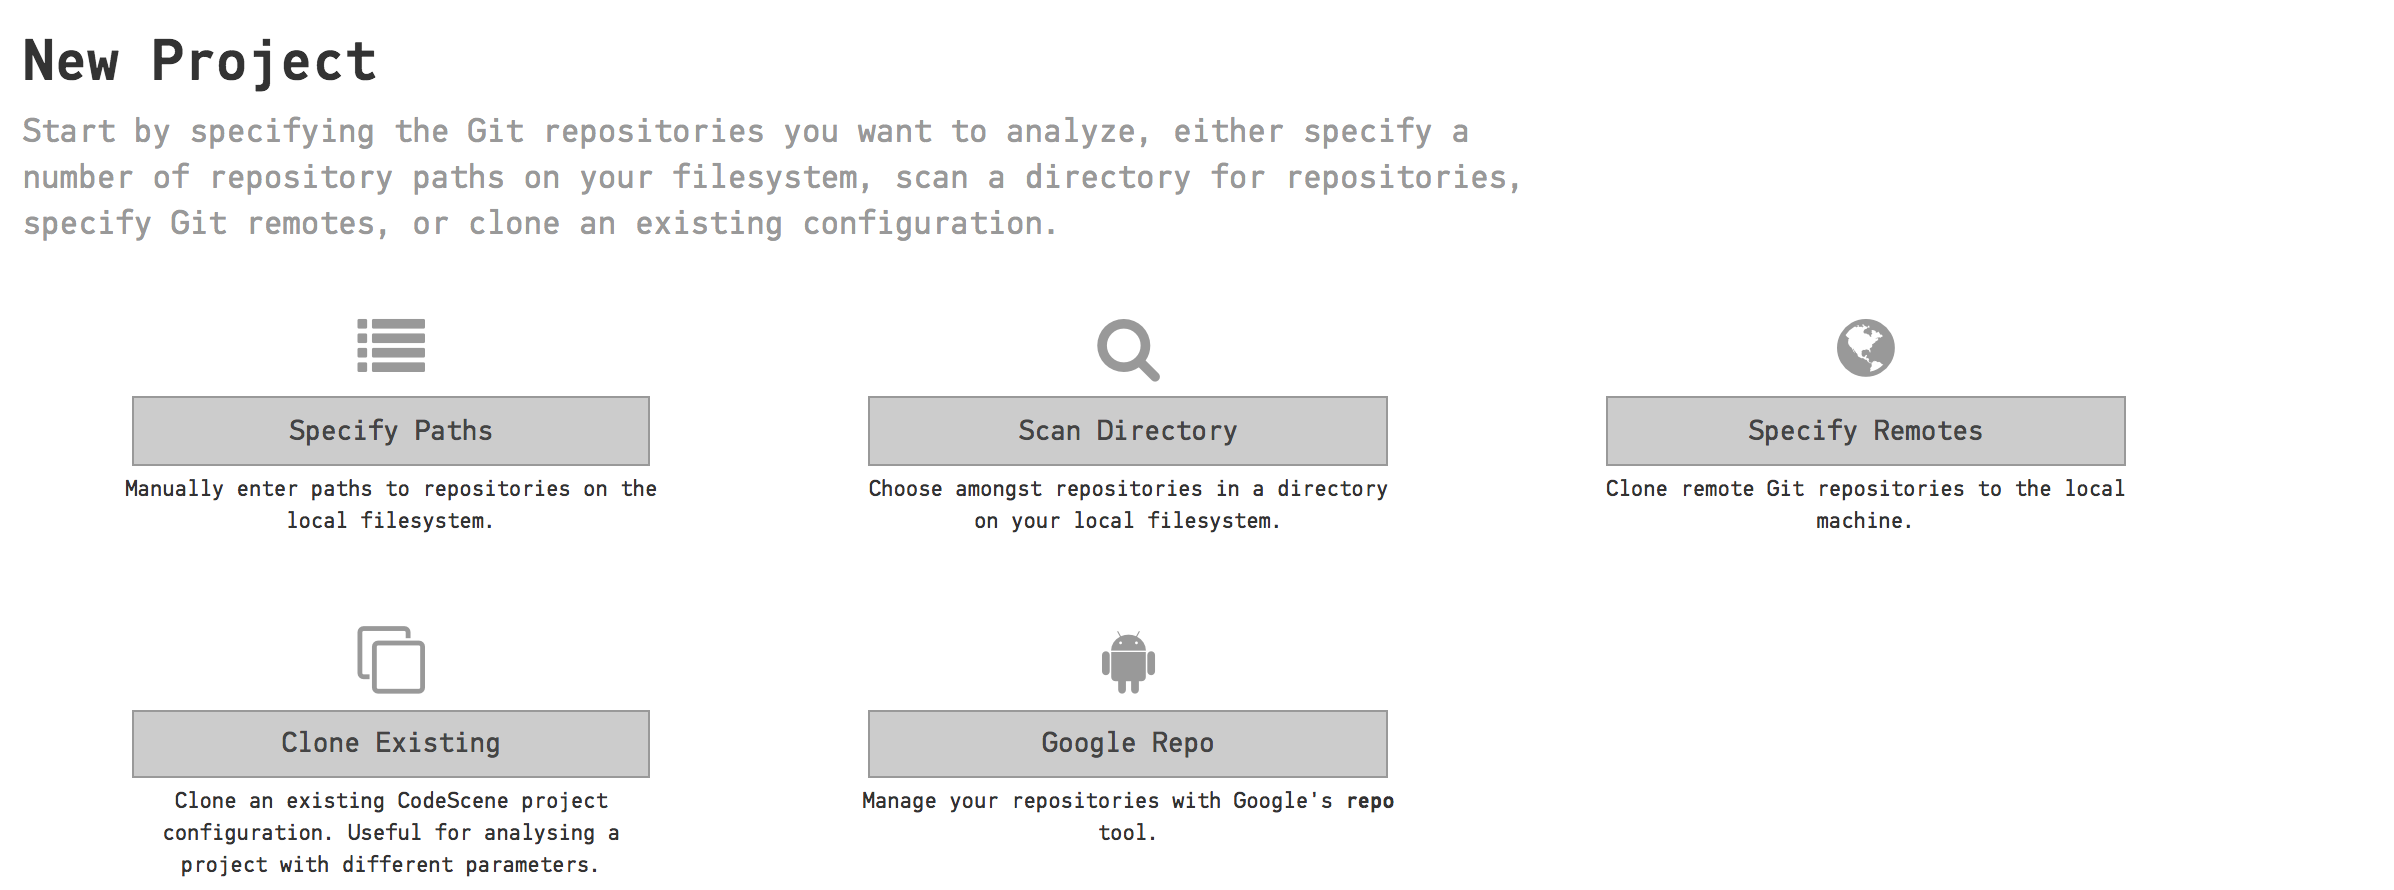 You have five different ways of specifying the repositories to analyze.